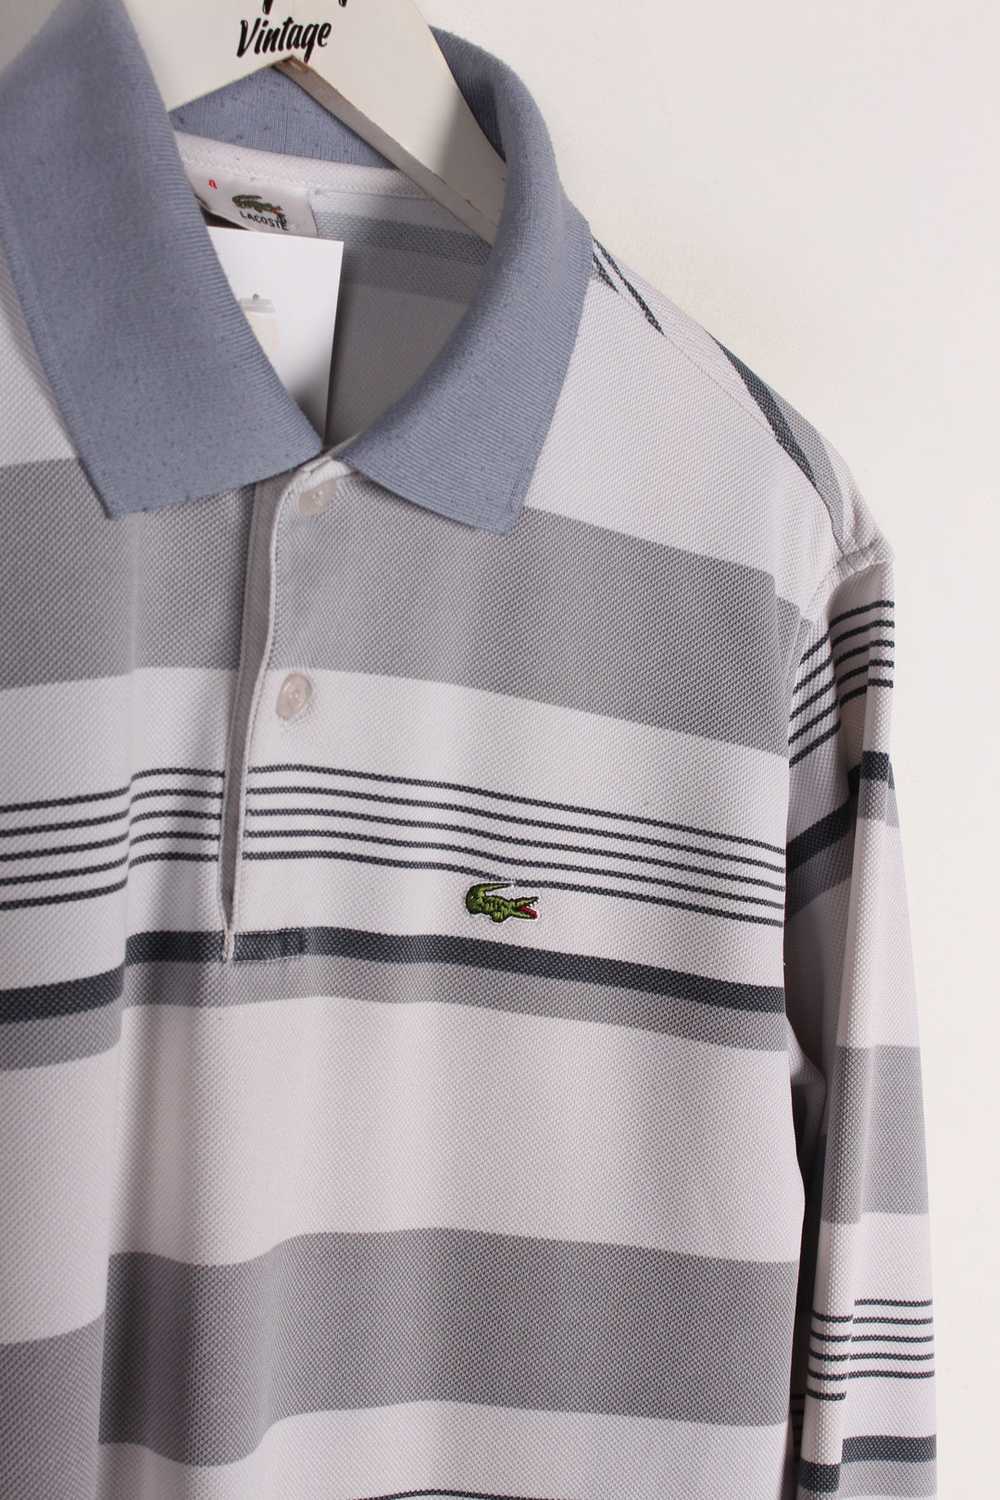 Lacoste Long Sleeved Polo Shirt Small - image 2